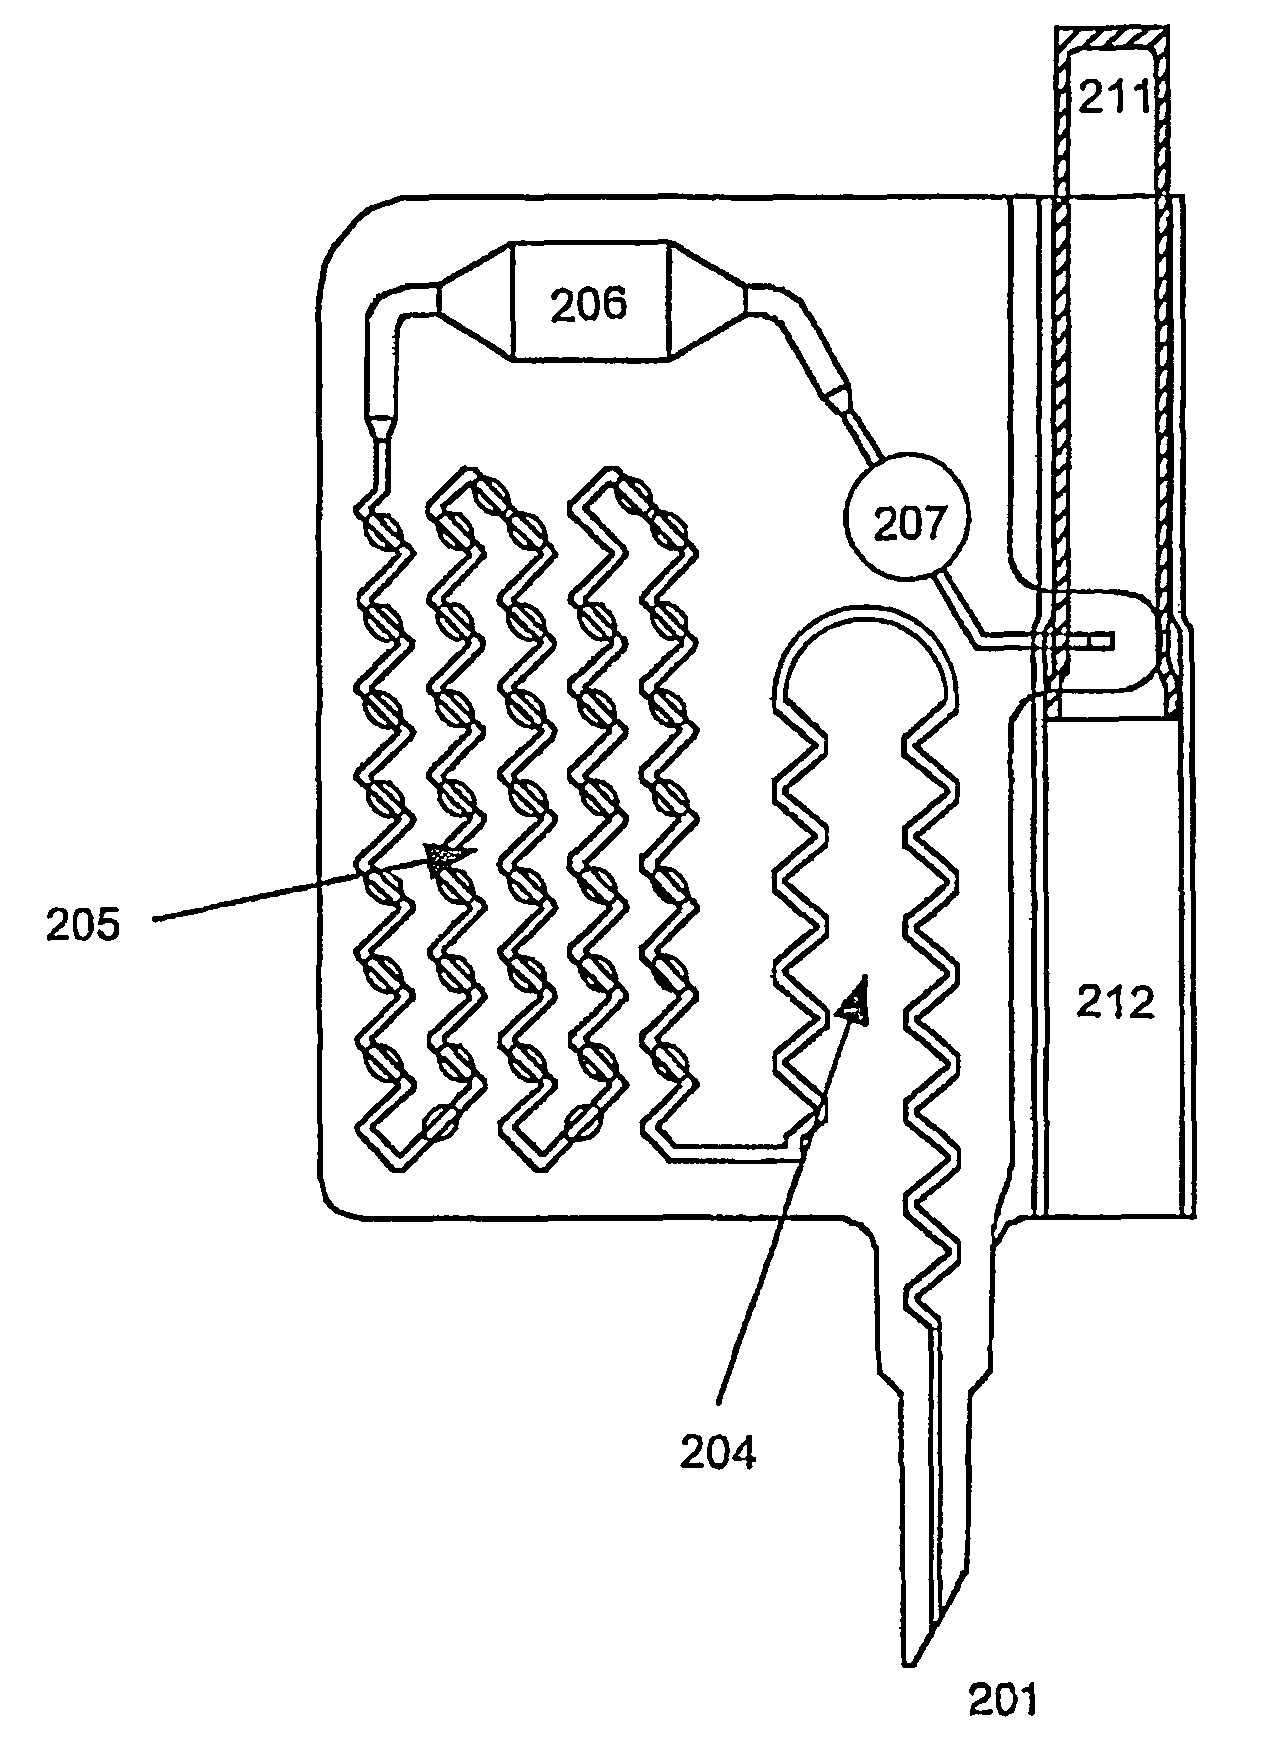 Method for the assessment of particles and a system and device for use in the method